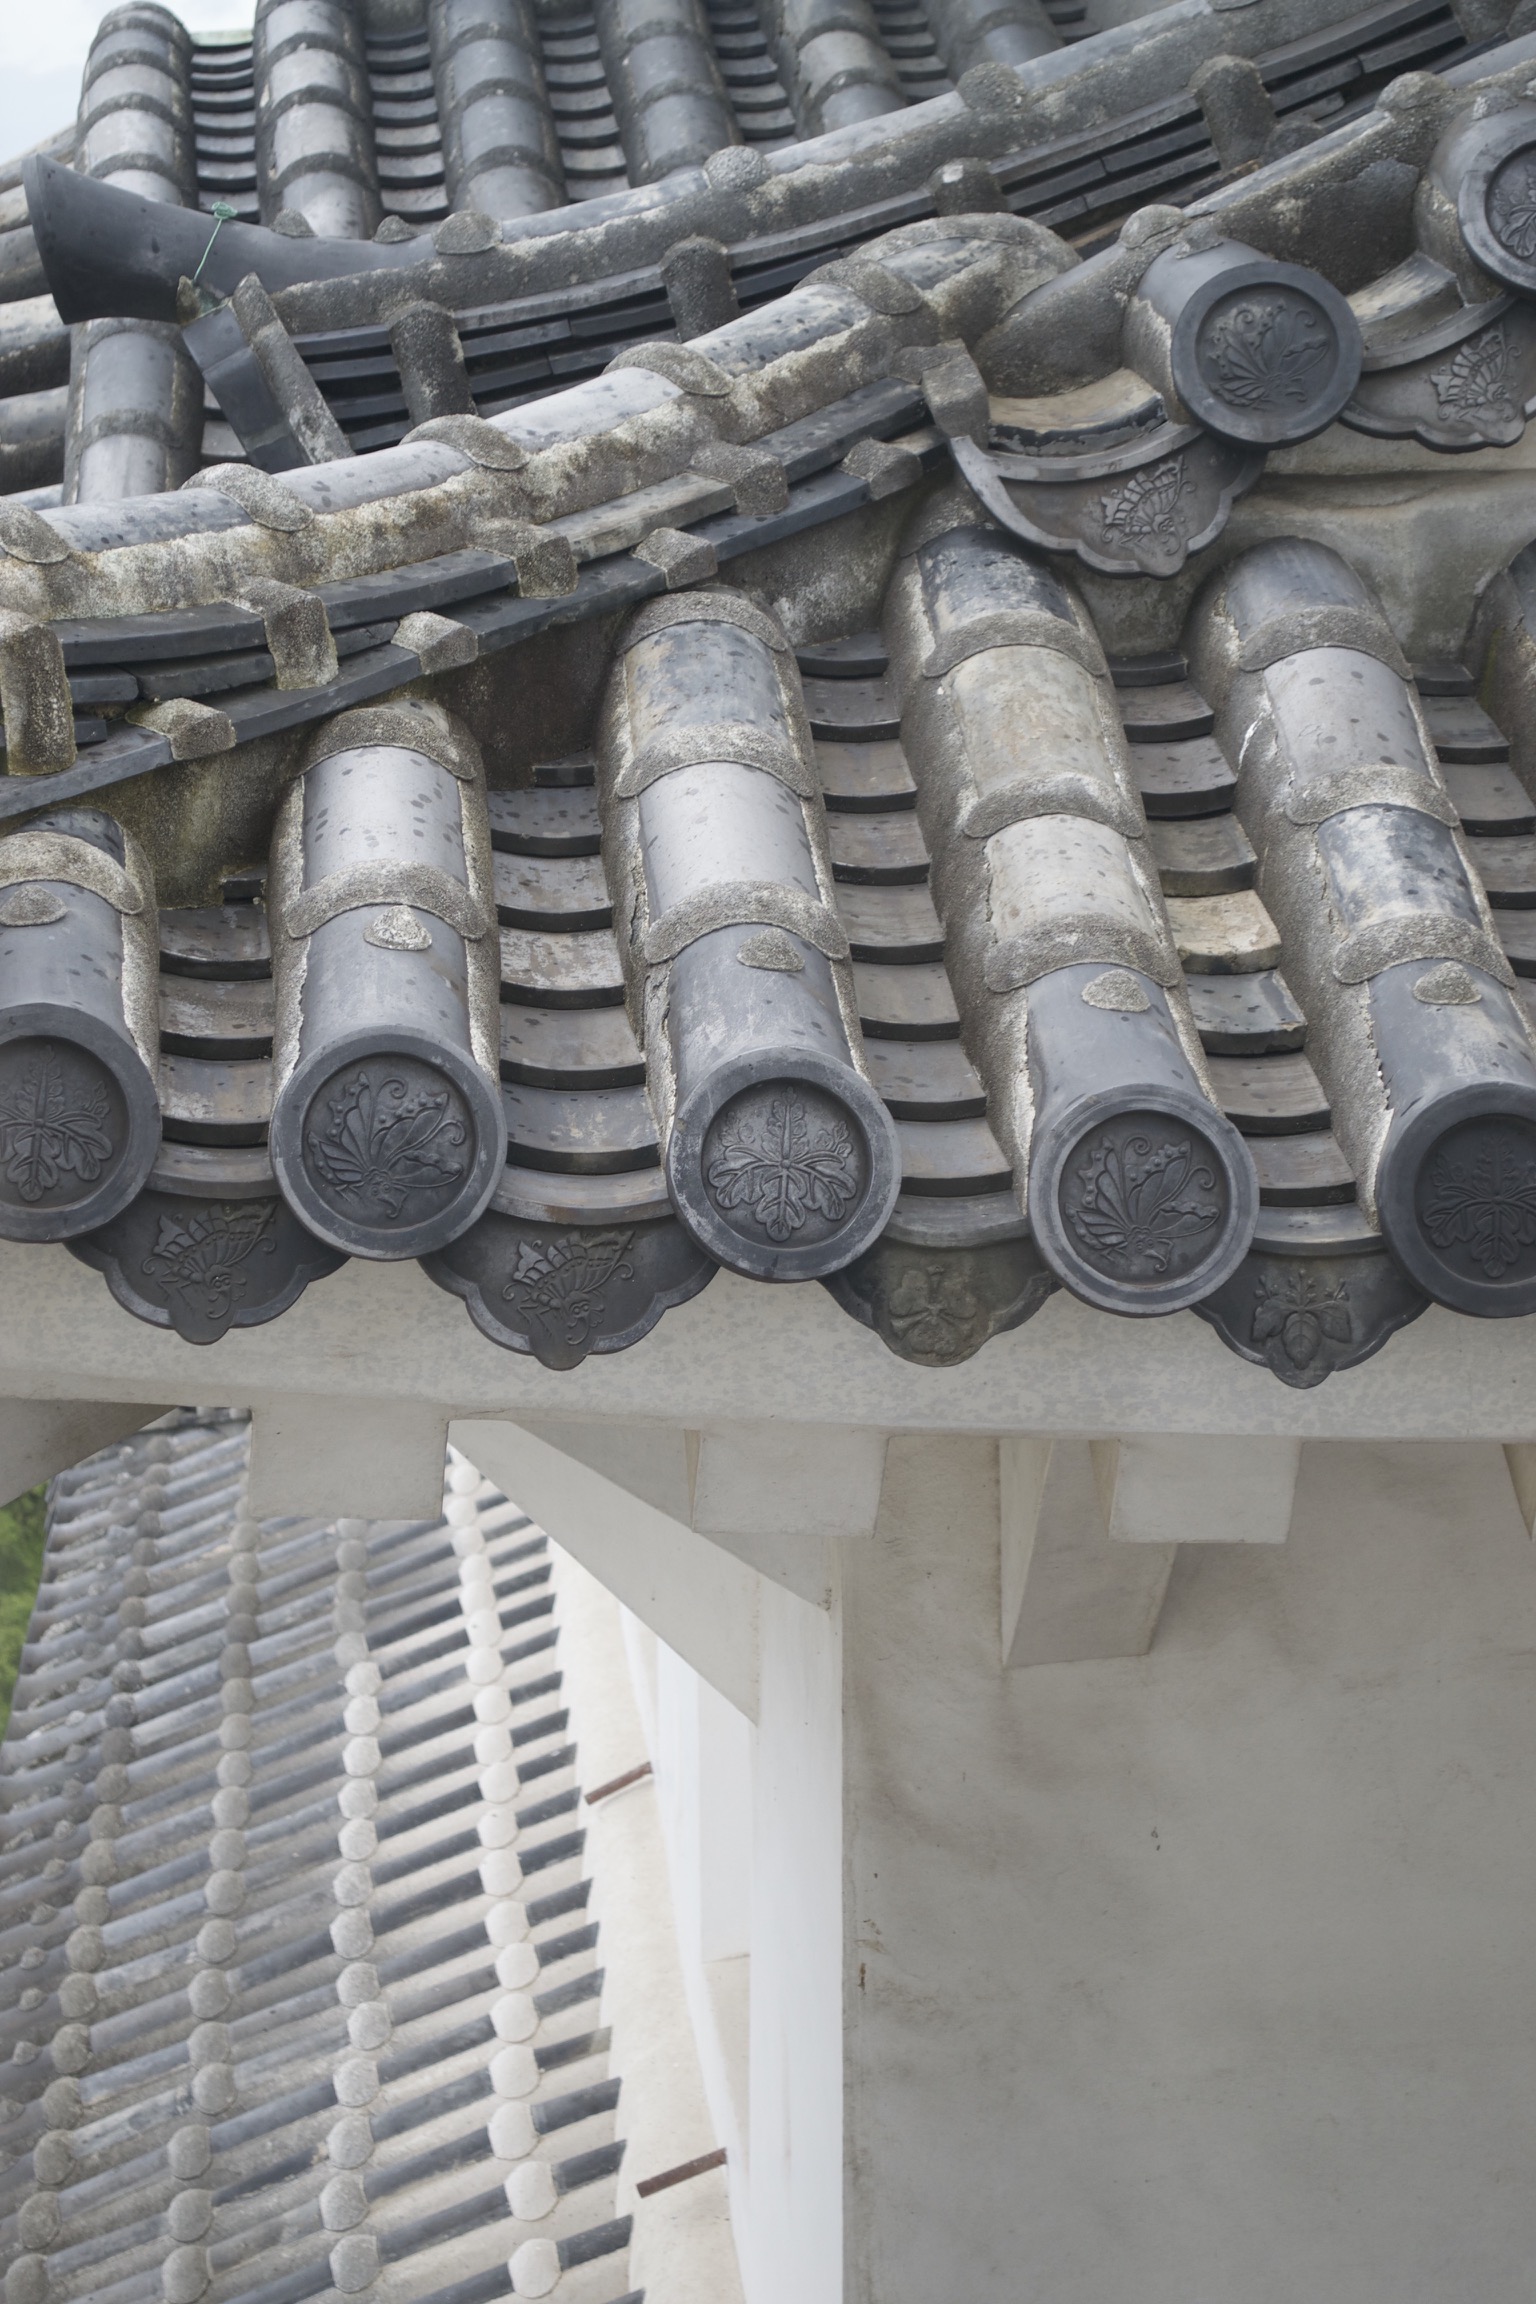 A close-up on the tiles shows circular caps at the end of the roof.